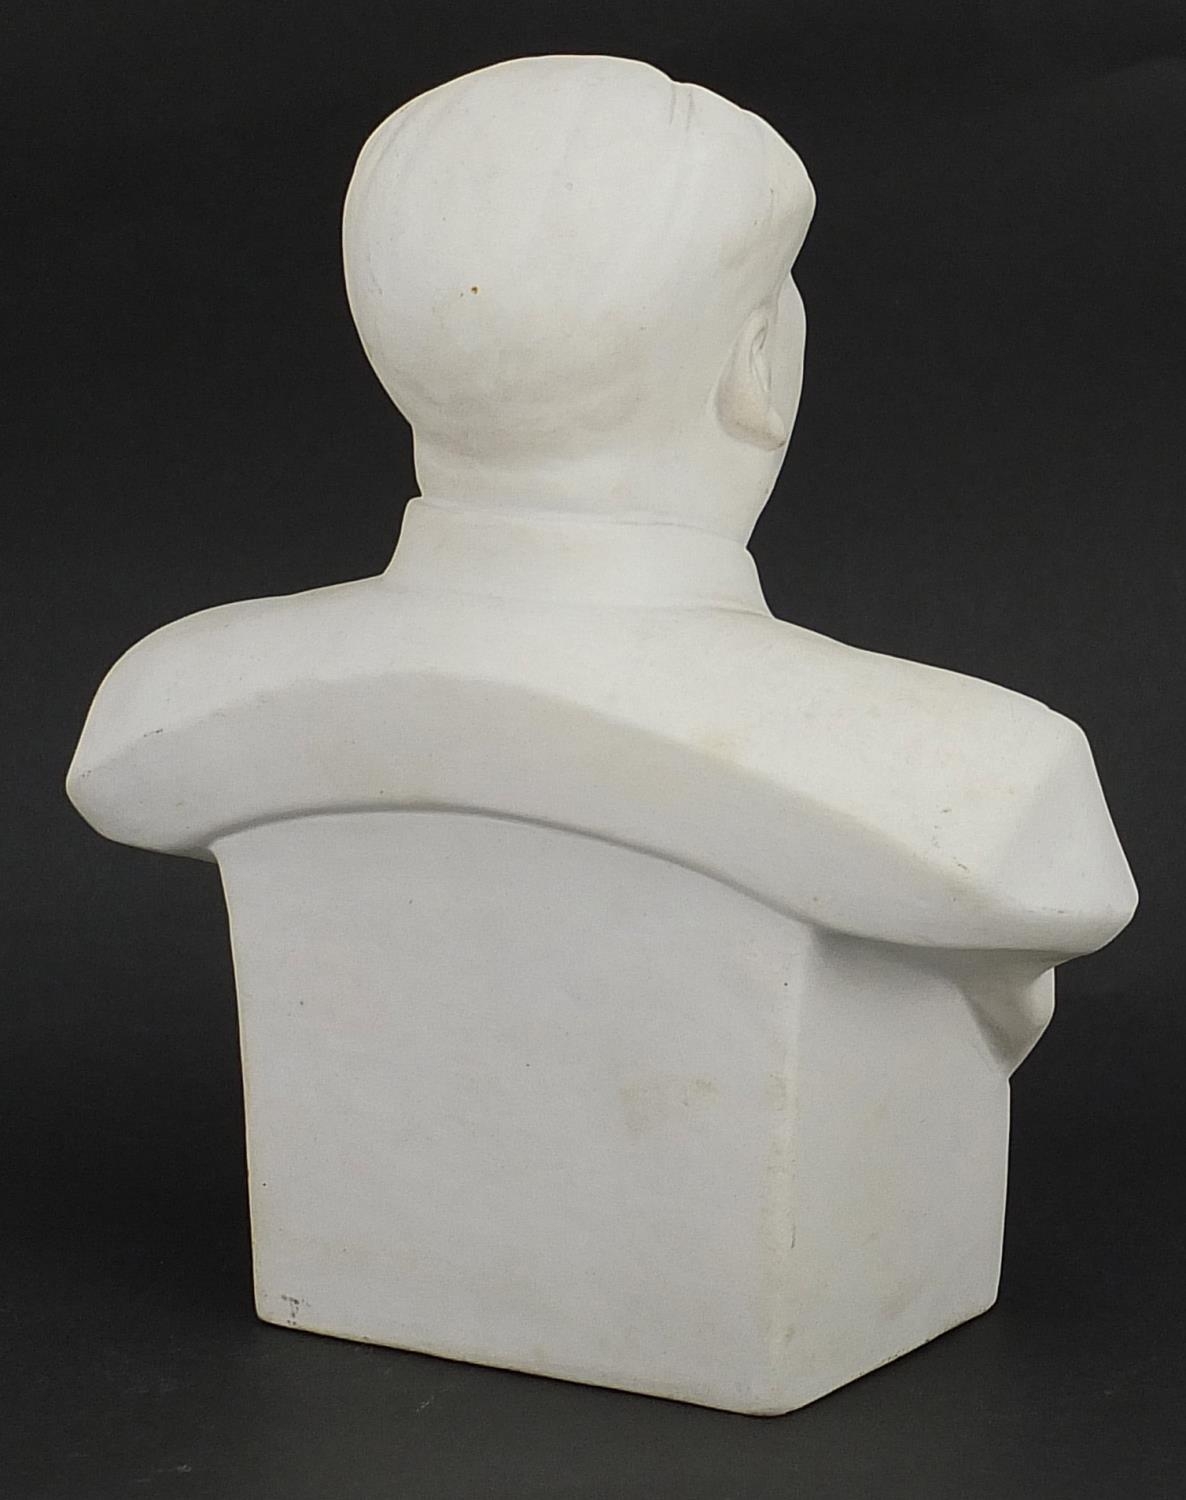 Chinese political interest parian ware bust of Chairman Mao, 19cm high - Image 2 of 3